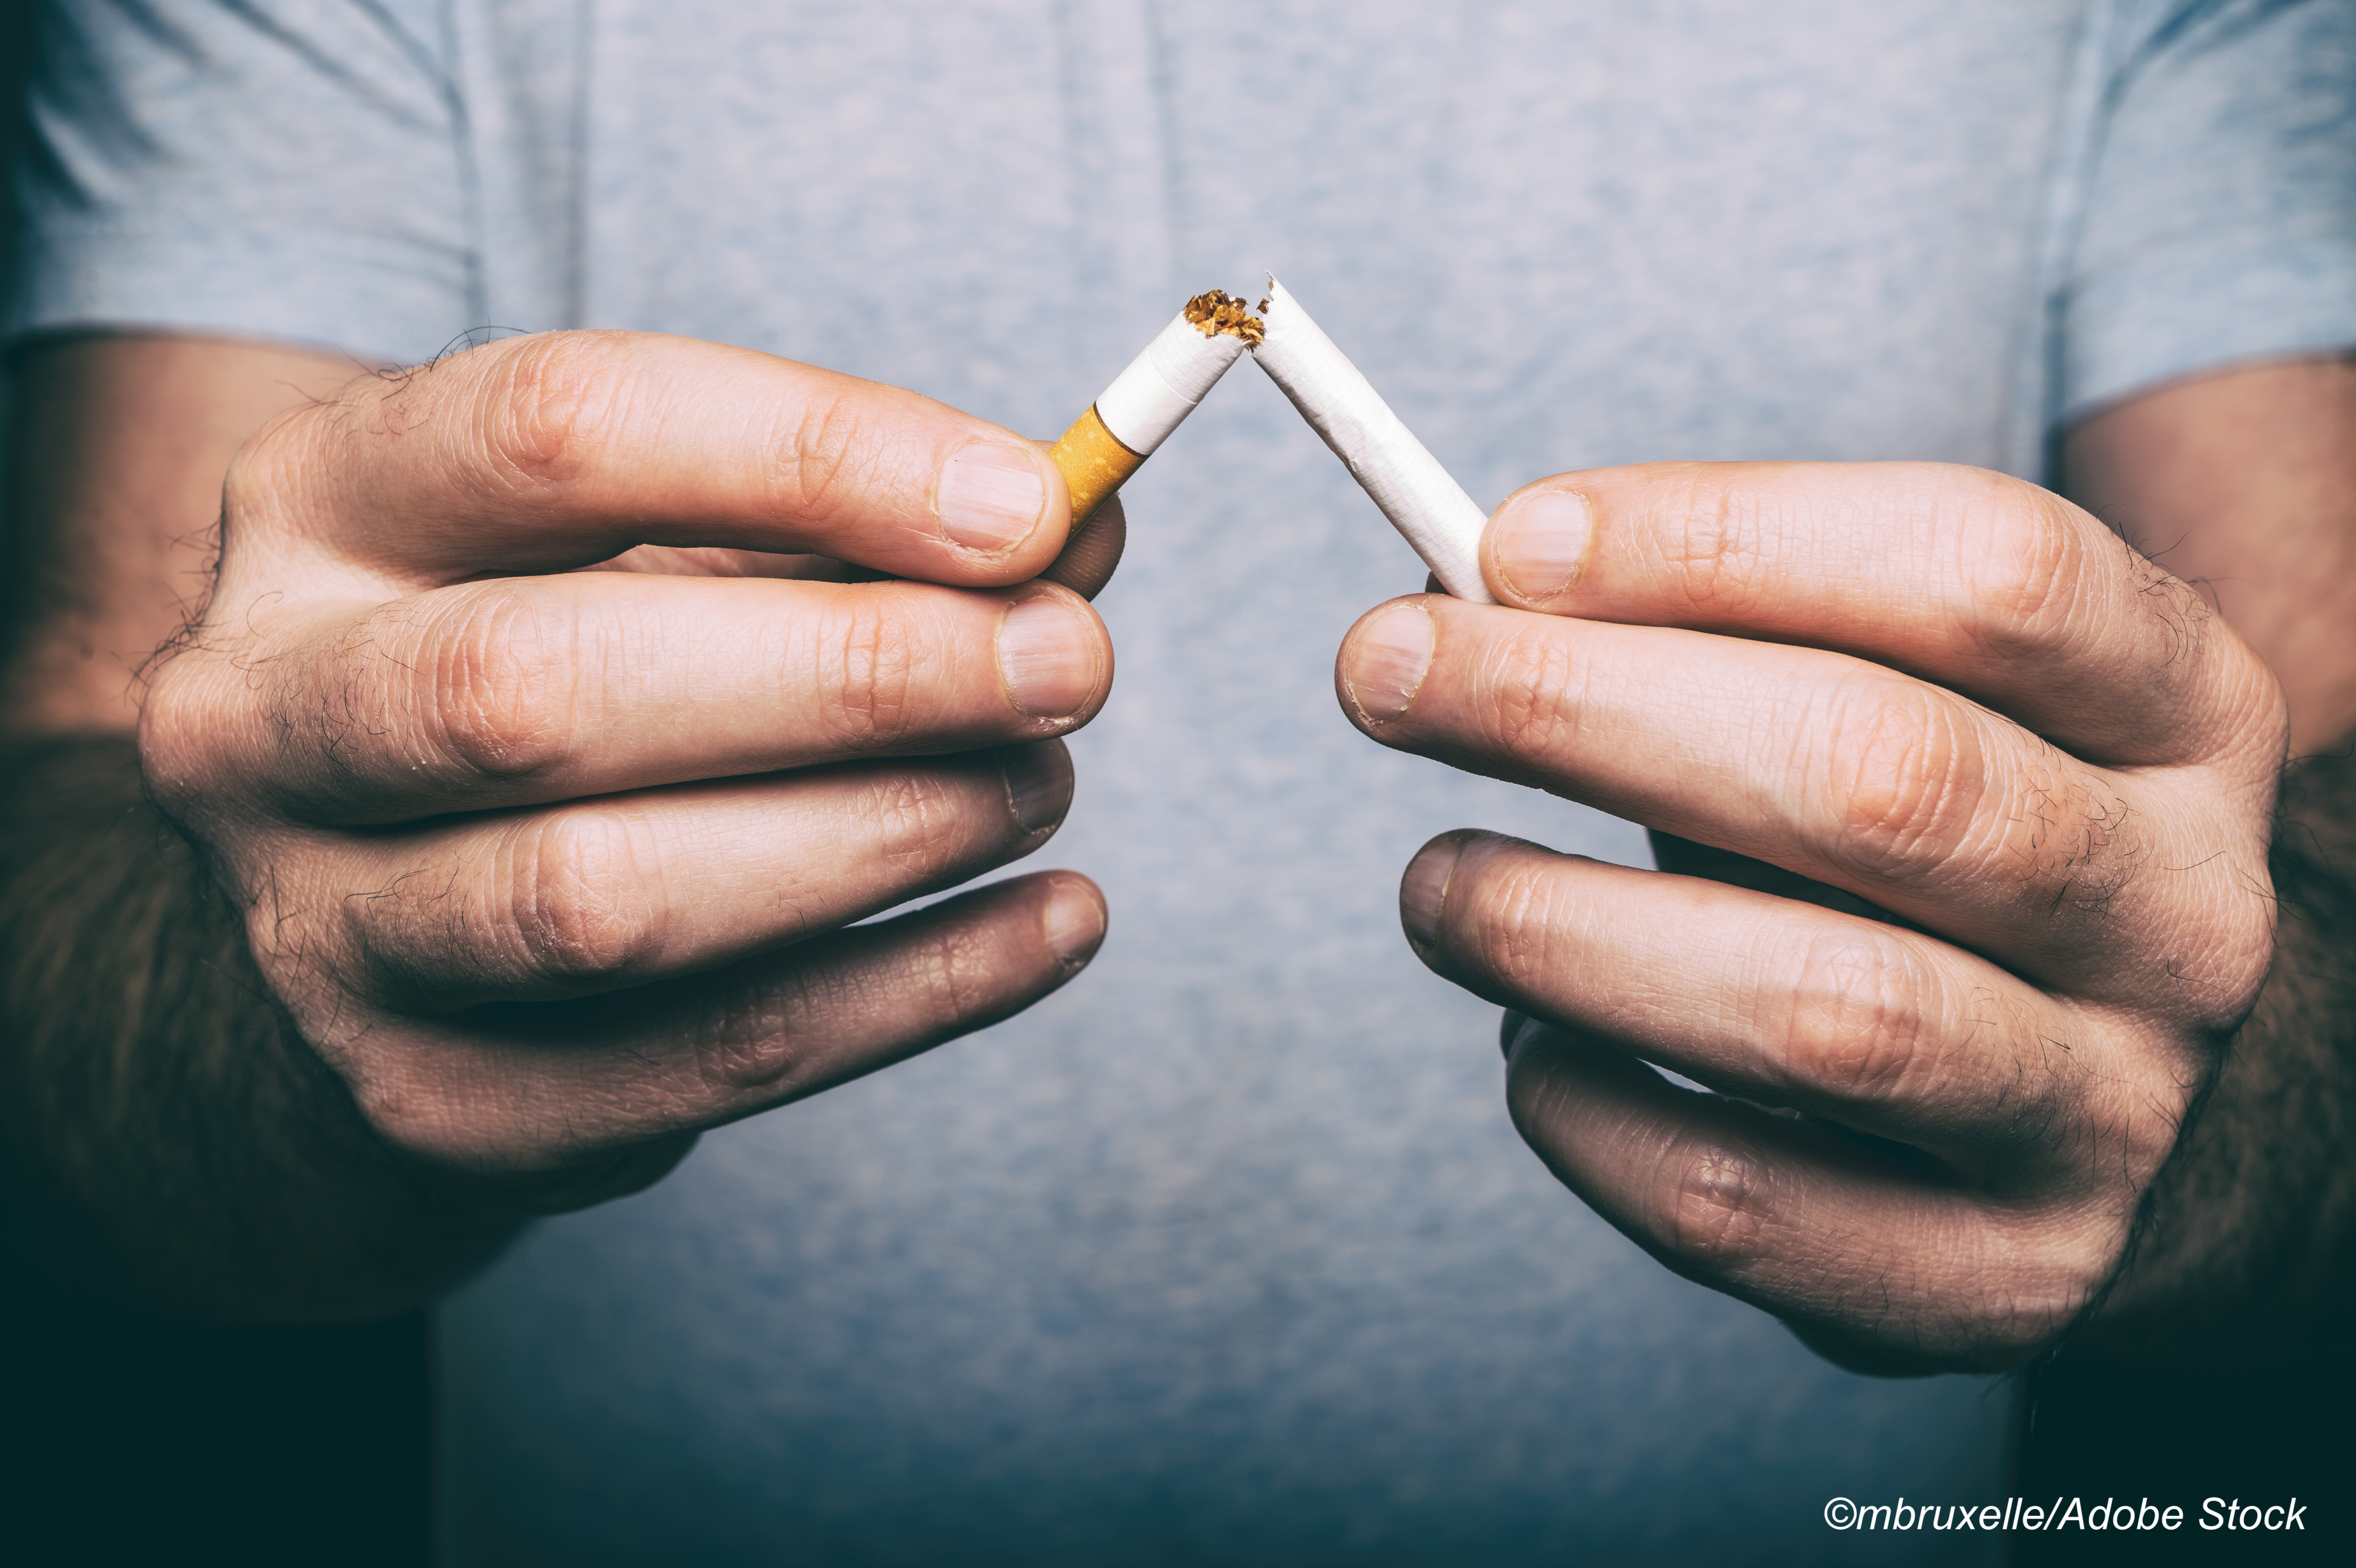 Game App Helps Motivate Smokers Not Yet Ready to Quit